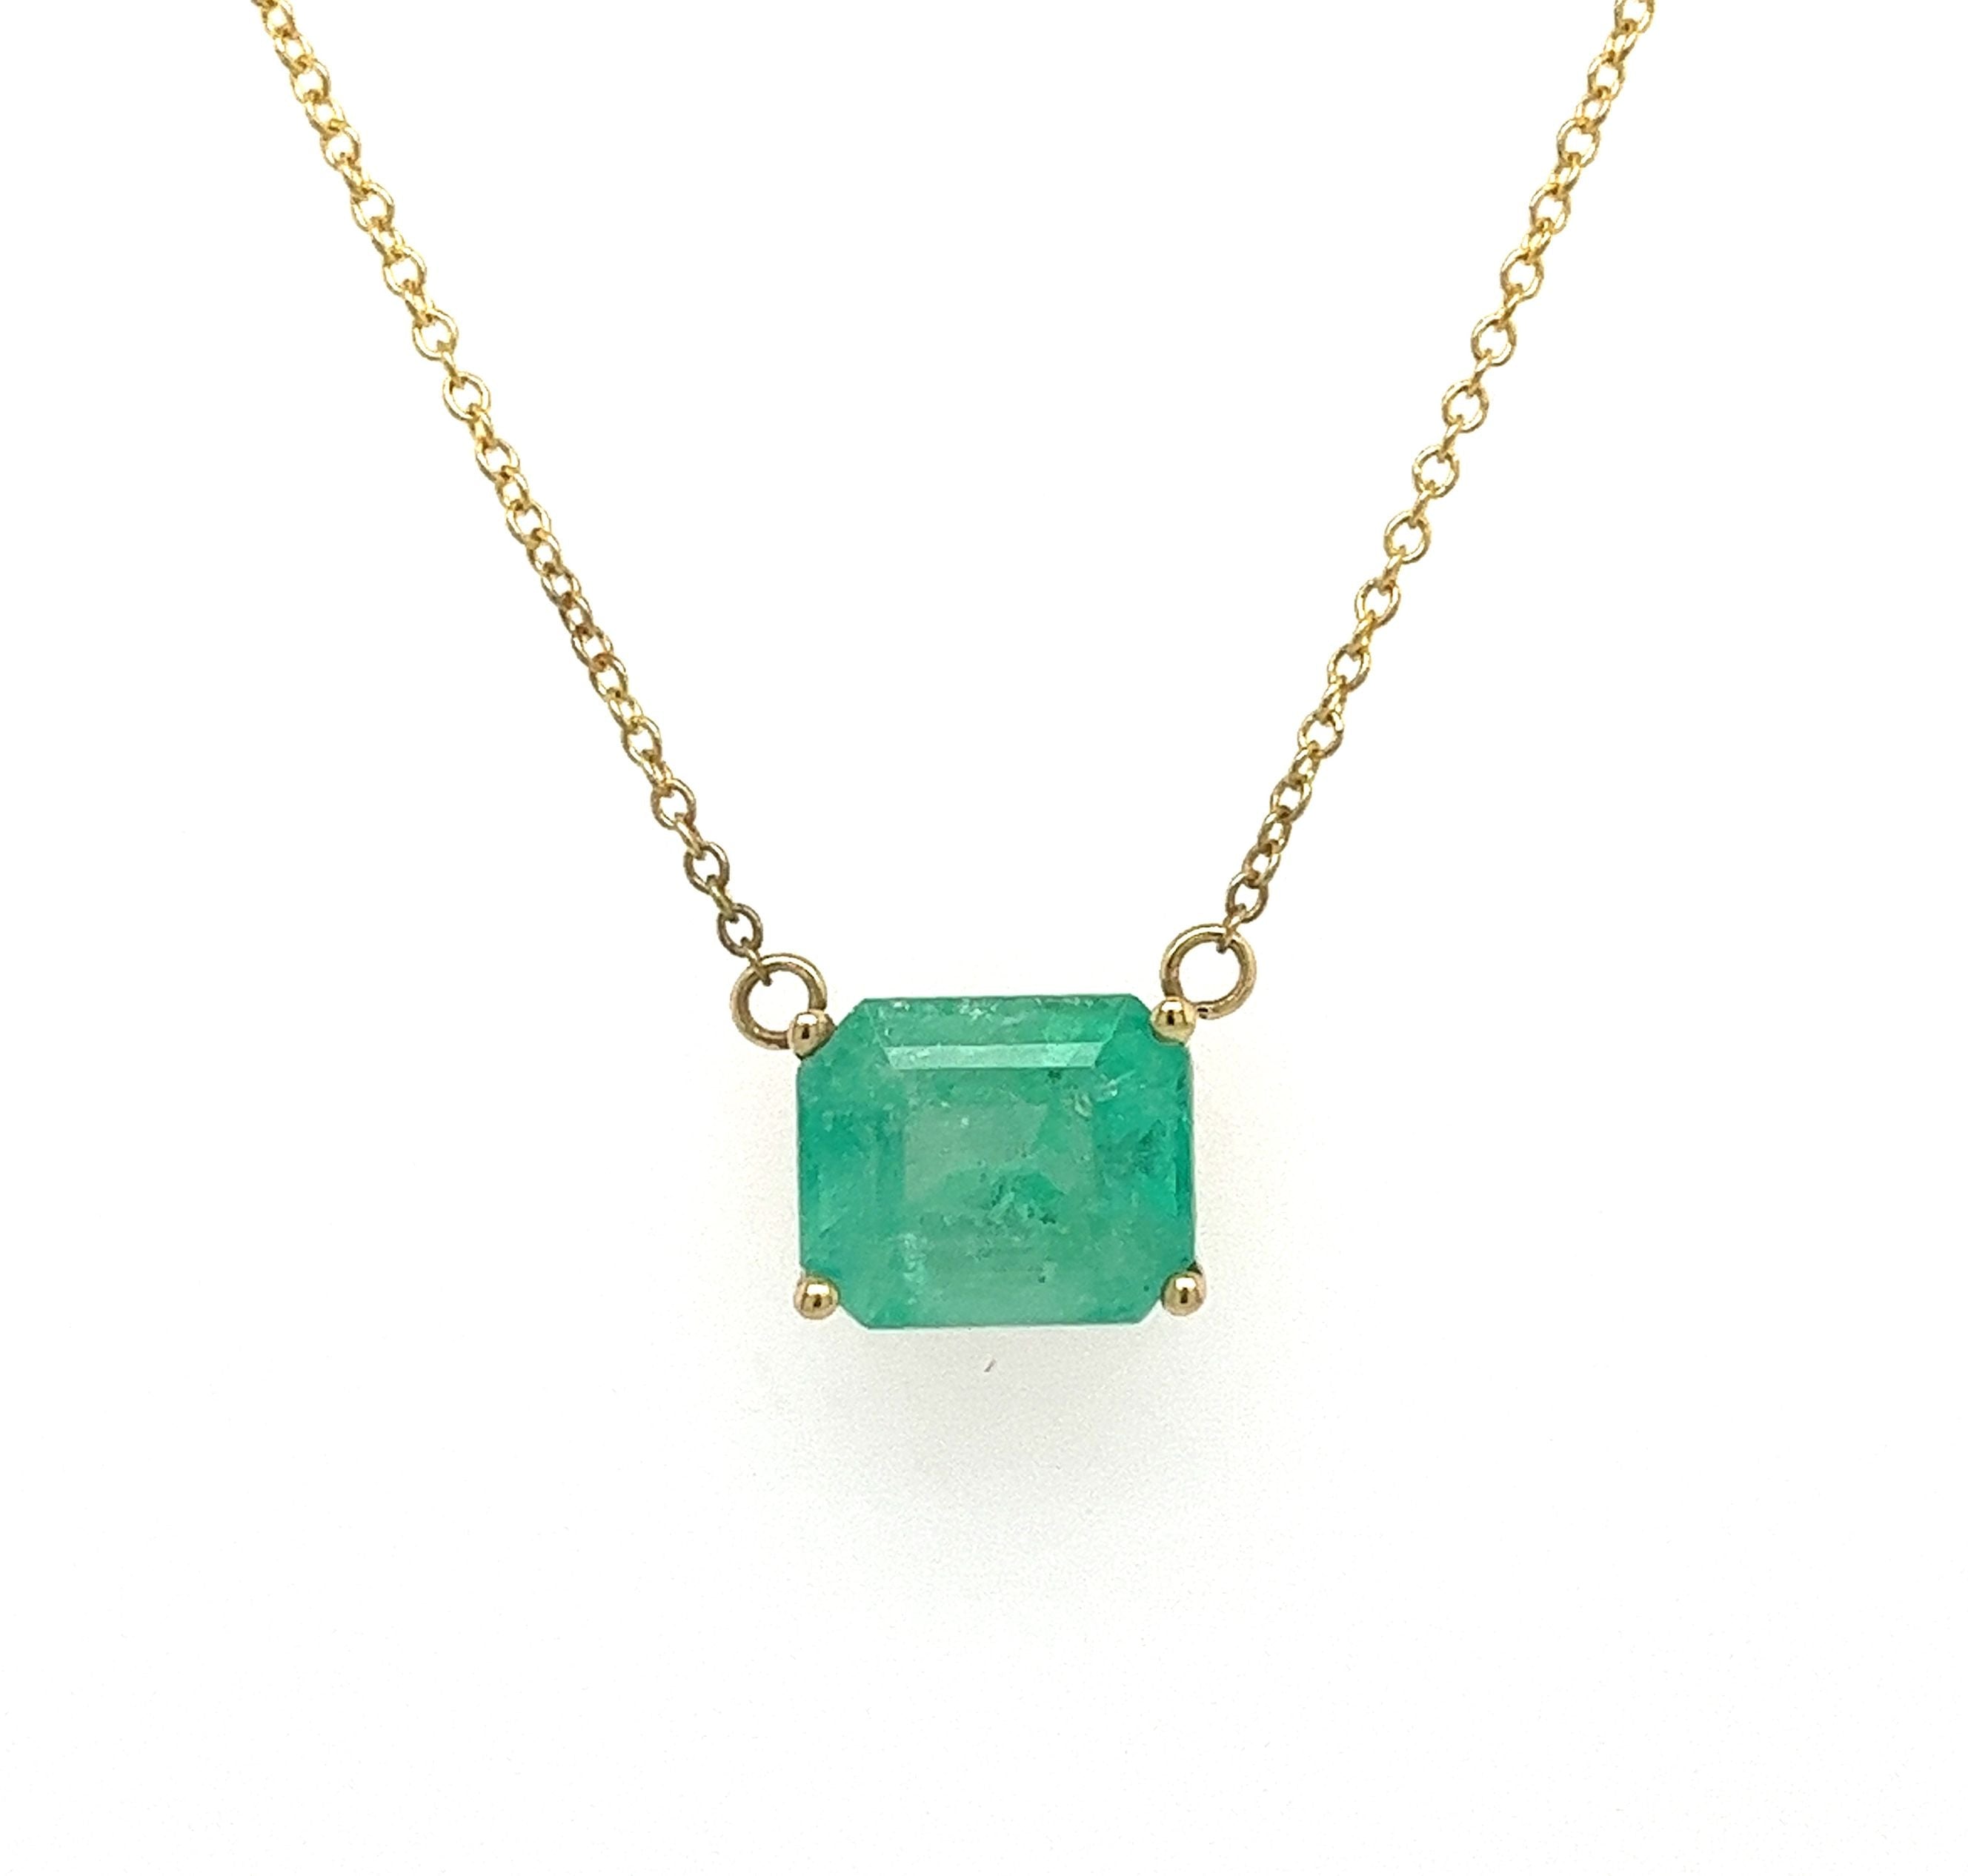 3_66-Carat-Emerald-Cut-Colombian-Emerald-Solitaire-East-West-Pendant-Necklace-in-14K-Yellow-Gold-Necklace-2.jpg